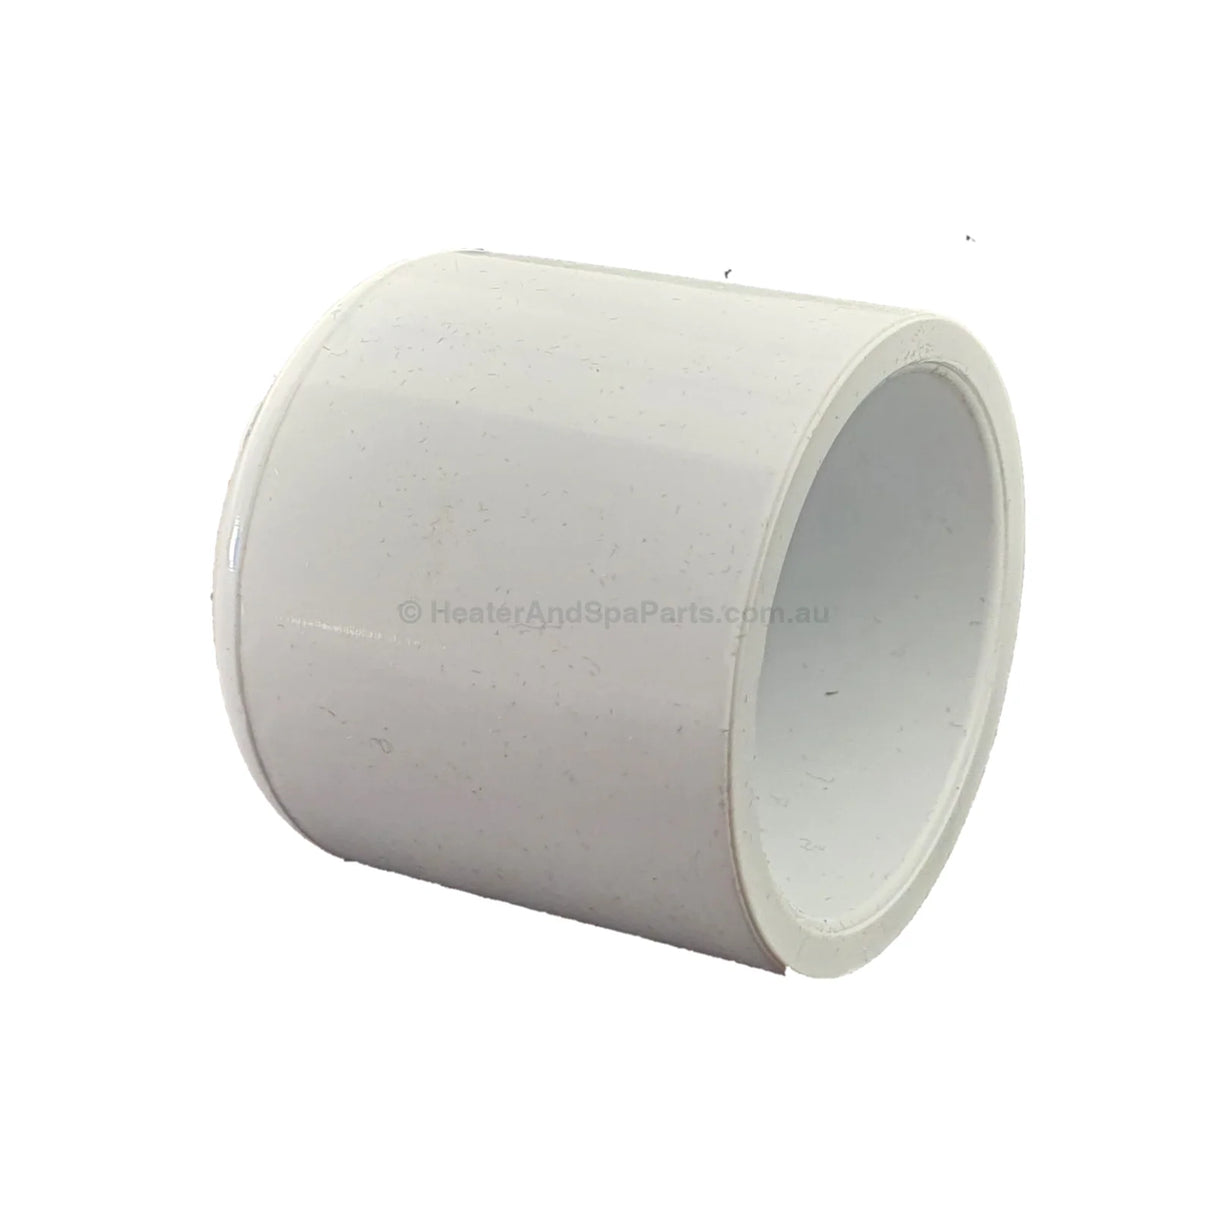 25mm / 1" End Cap - PVC - Heater and Spa Parts